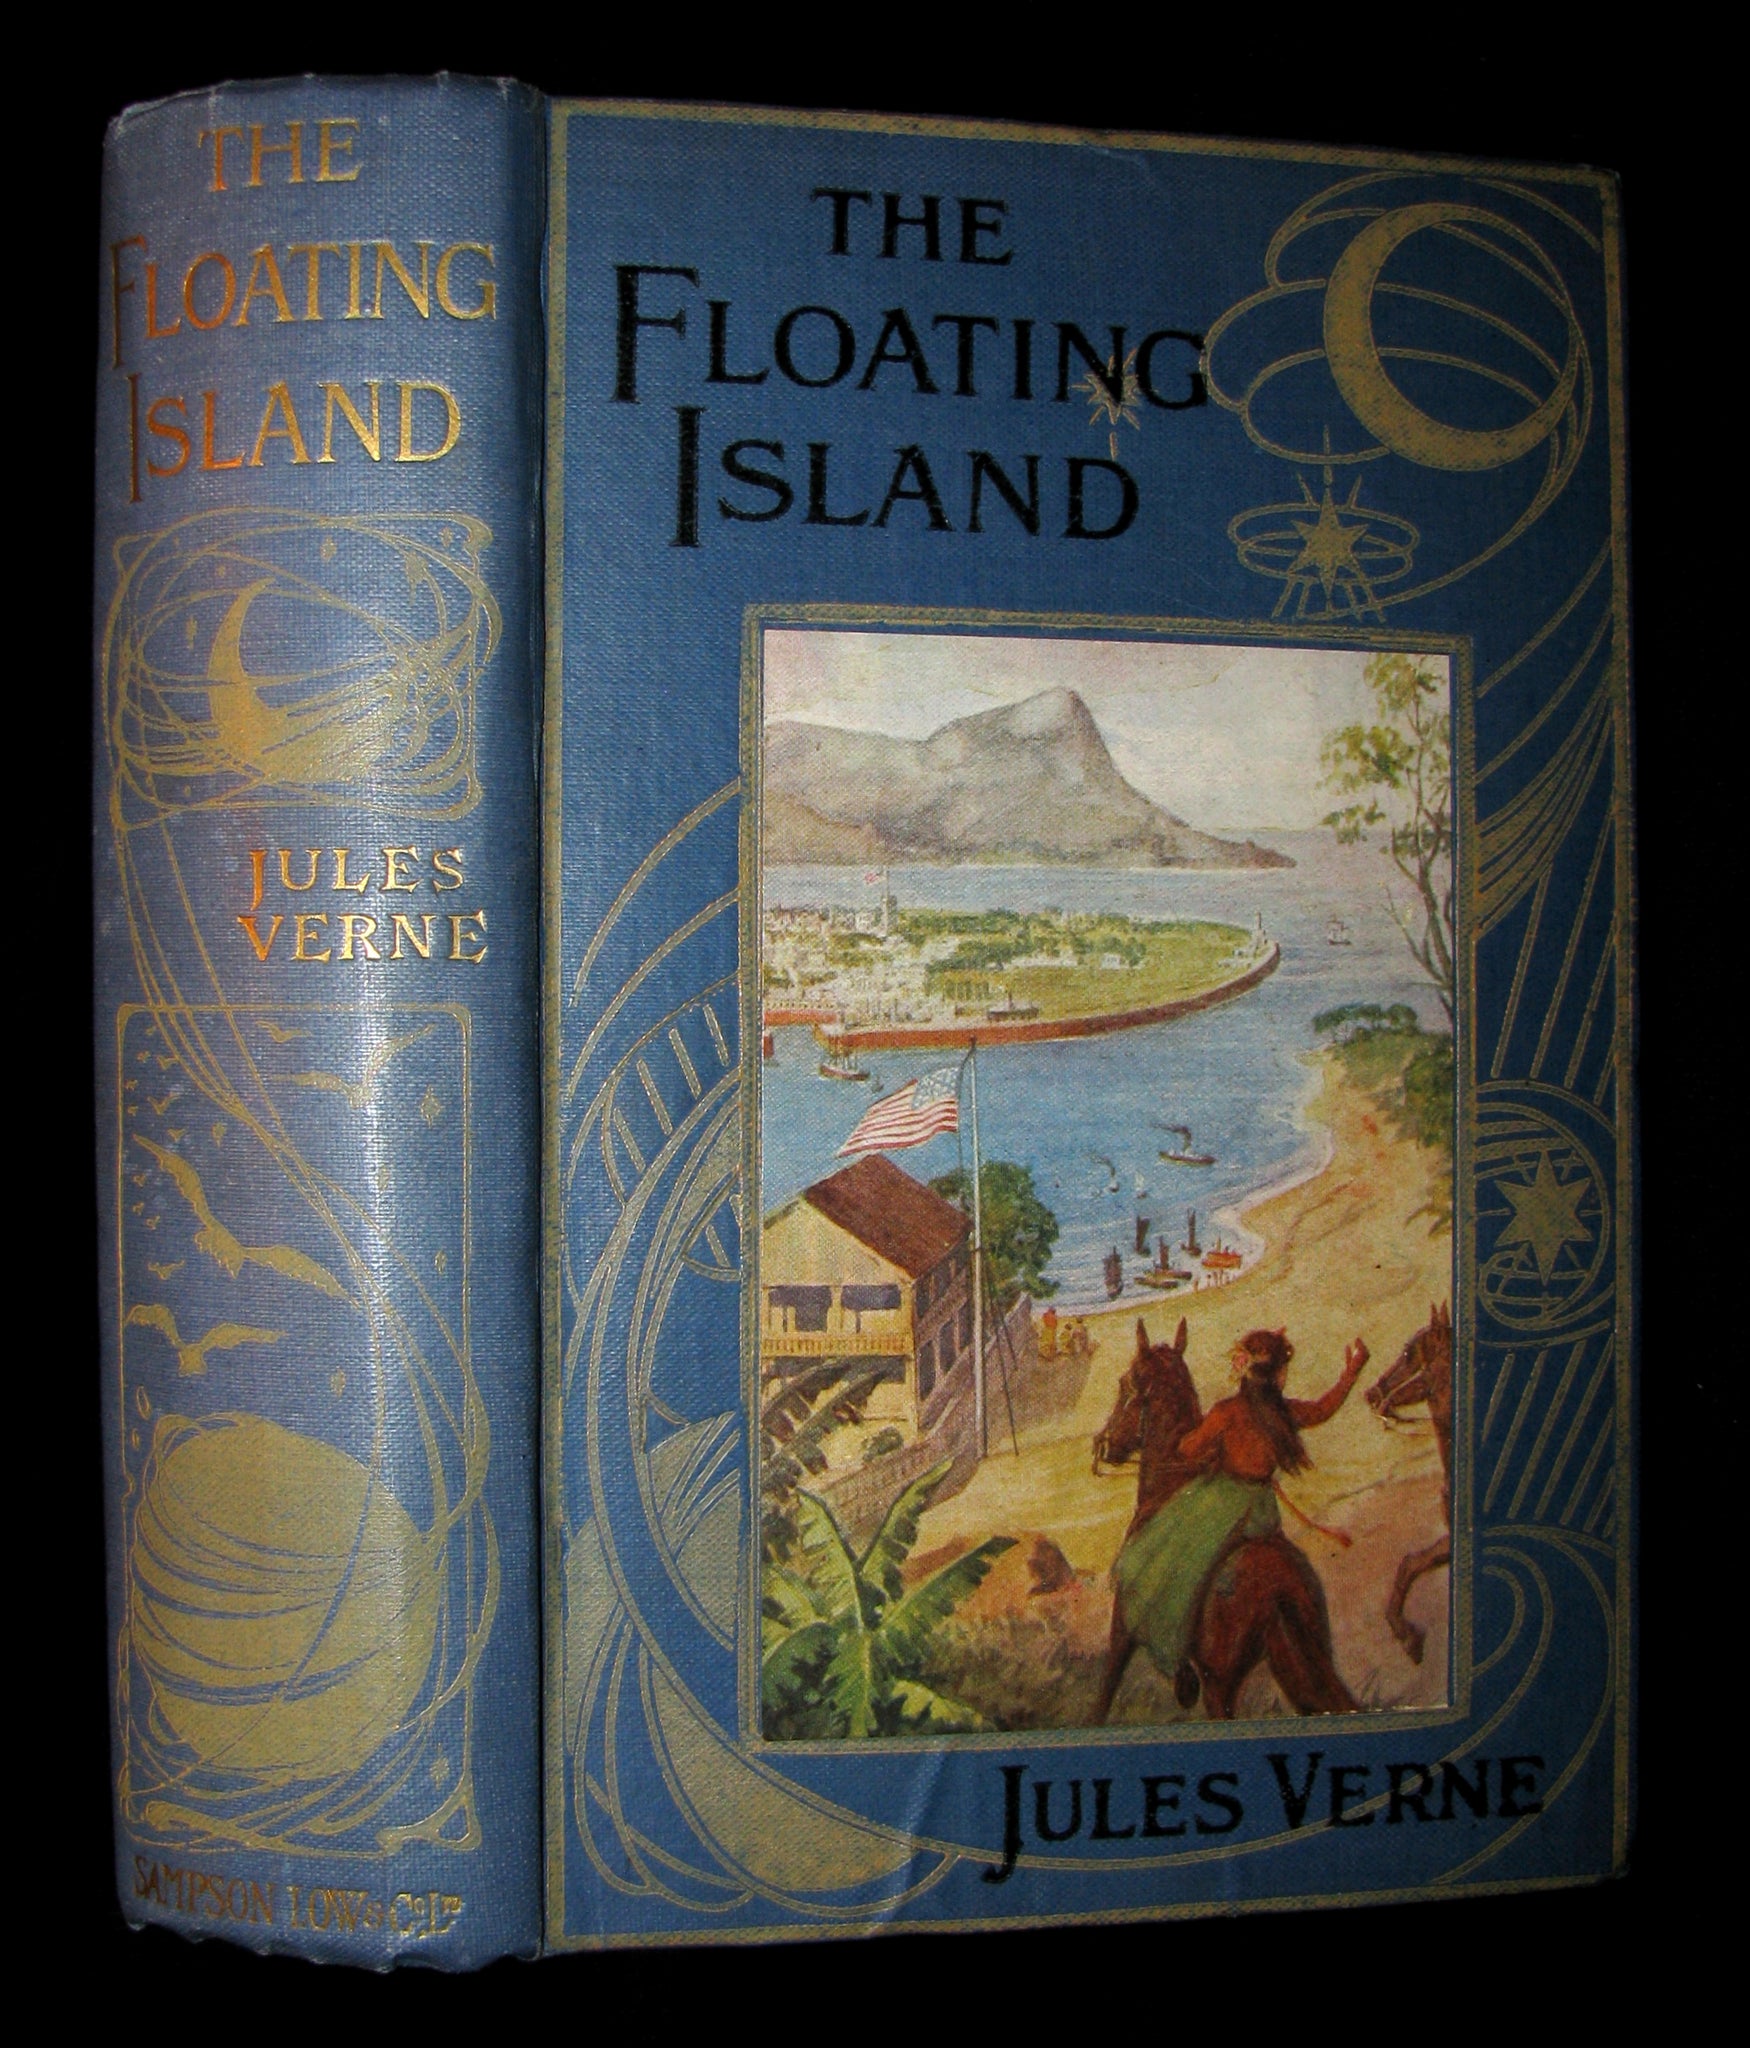 1915 Rare Book - The Floating Island, or, The Pearl of the Pacific by Jules Verne